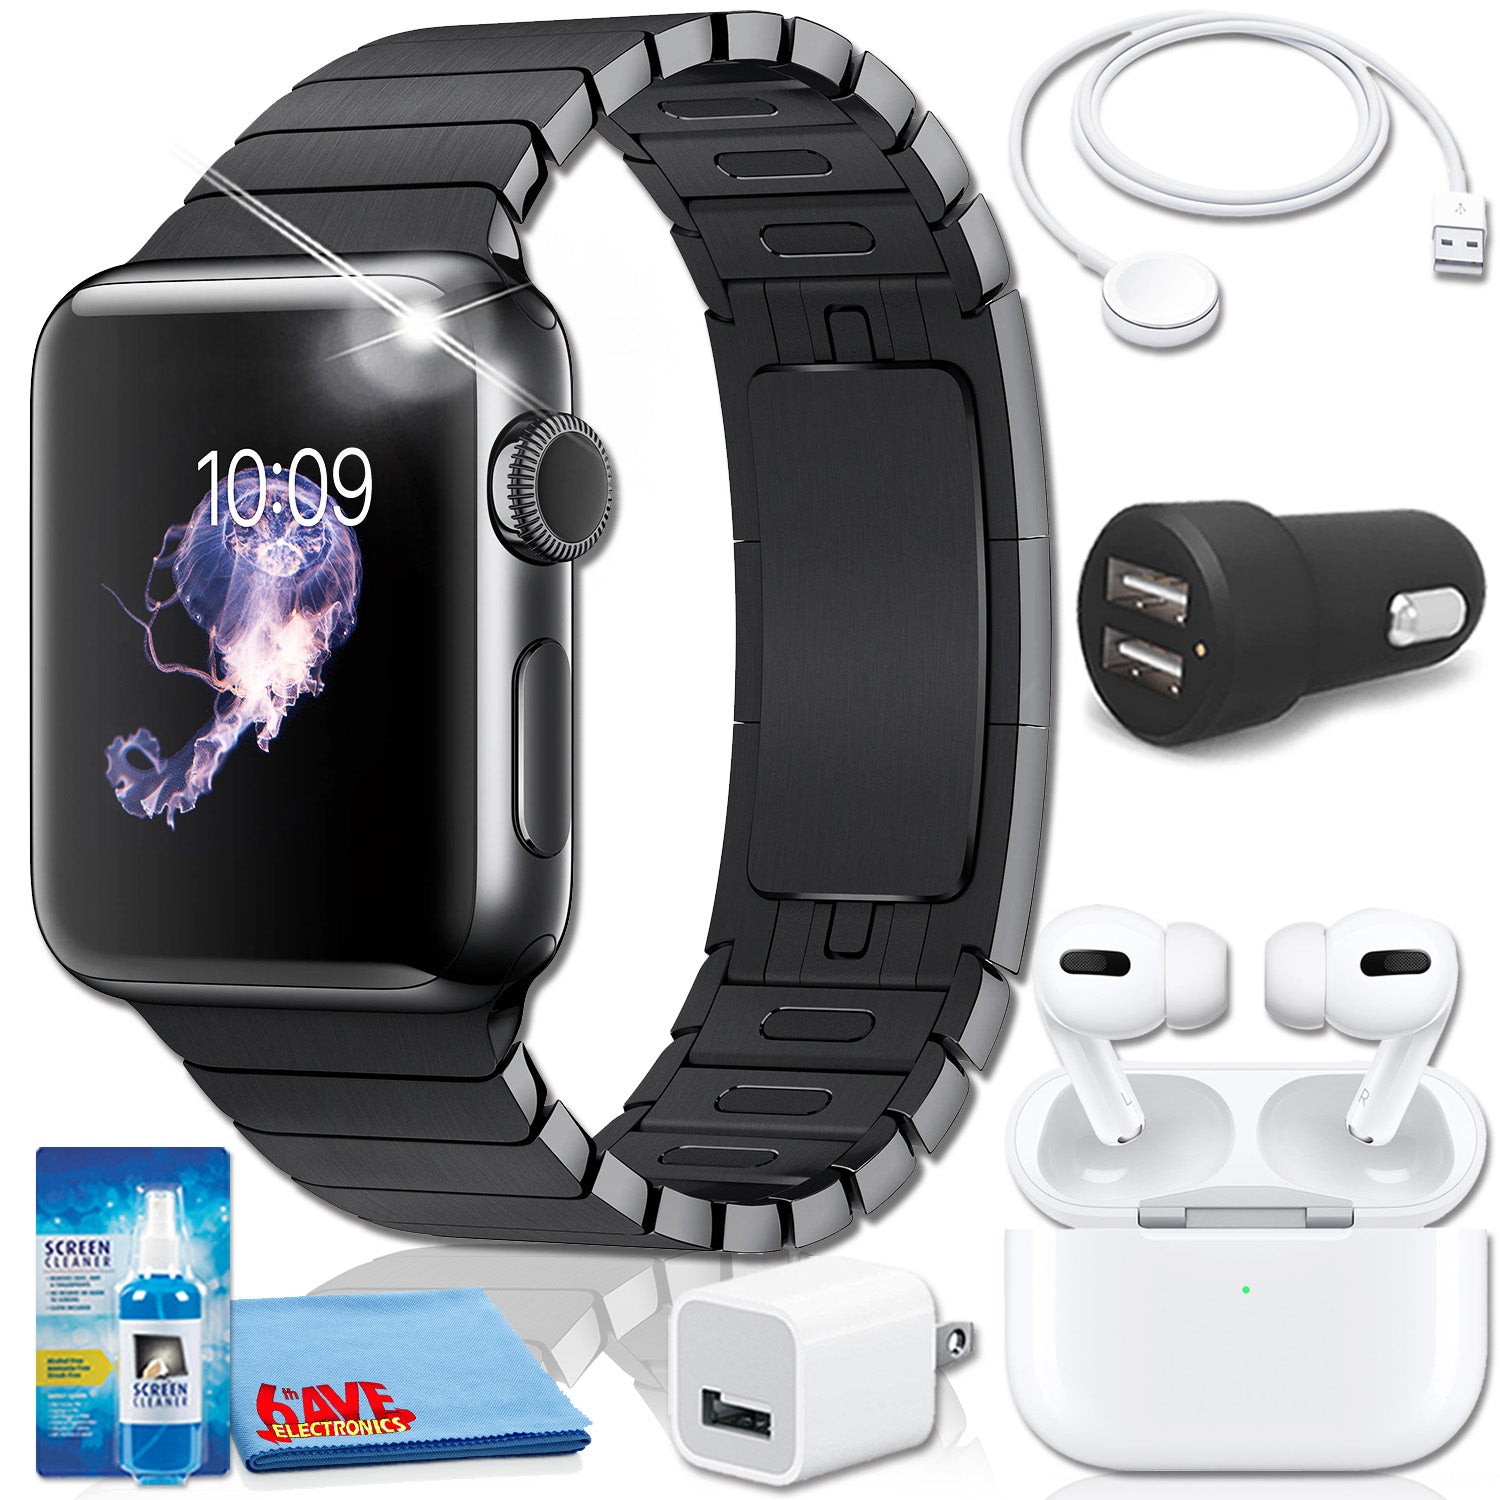 Apple Watch Series 2 Stainless Steel with Airpods Pro Bundle